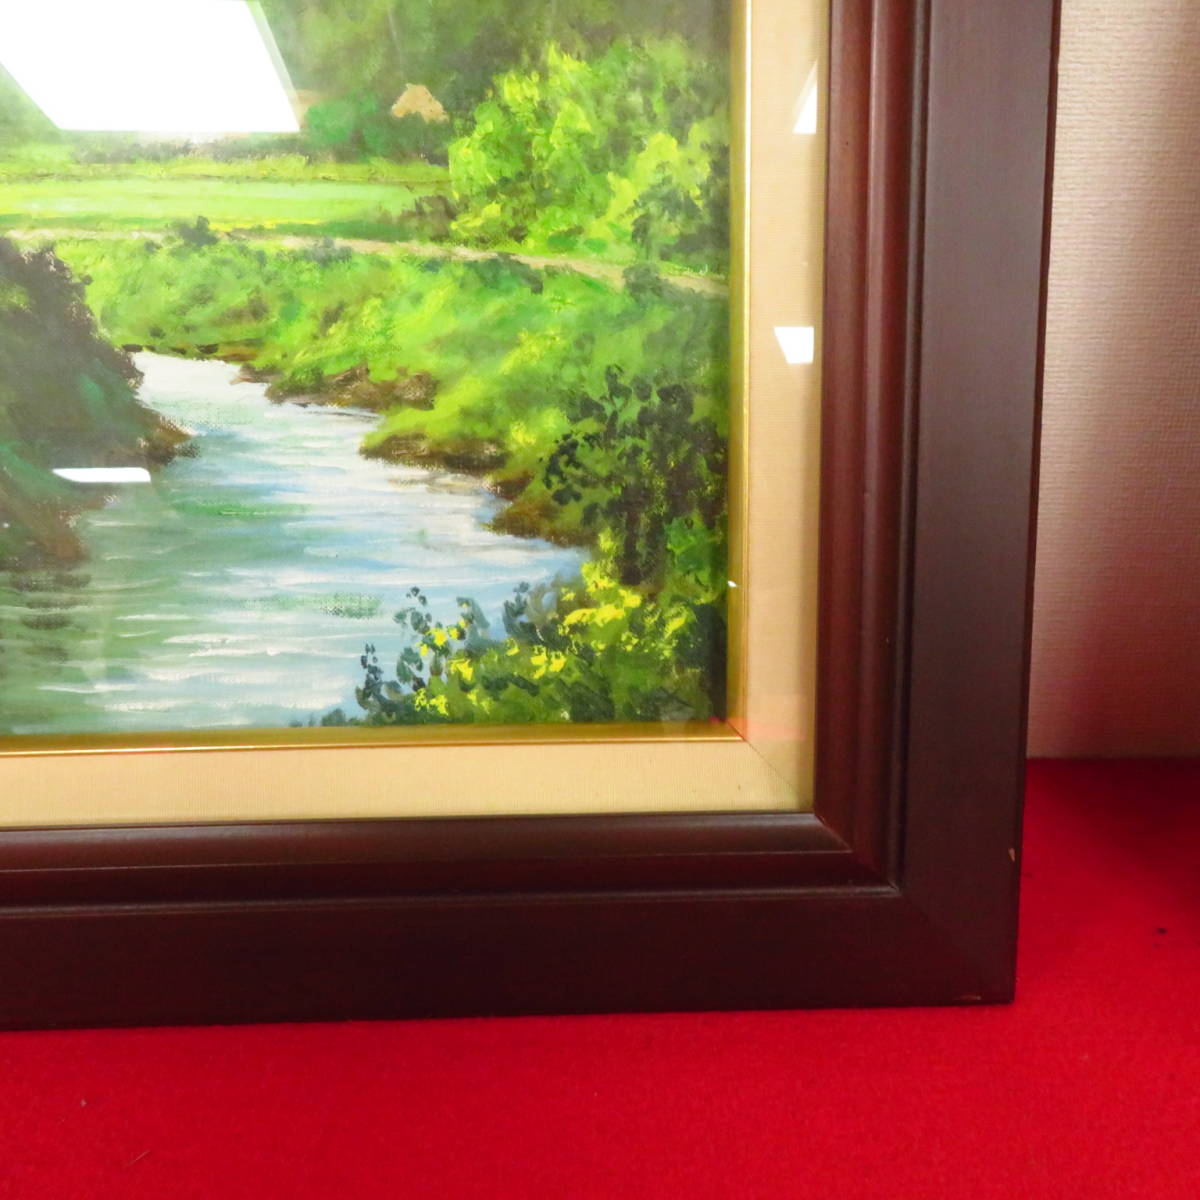  genuine work guarantee art work [ hot water . hot spring close. mountain ./ one water member Kobayashi ..] autograph landscape painting oil painting oil painting picture work of art art goods antique goods old work of art 68.7×61.3